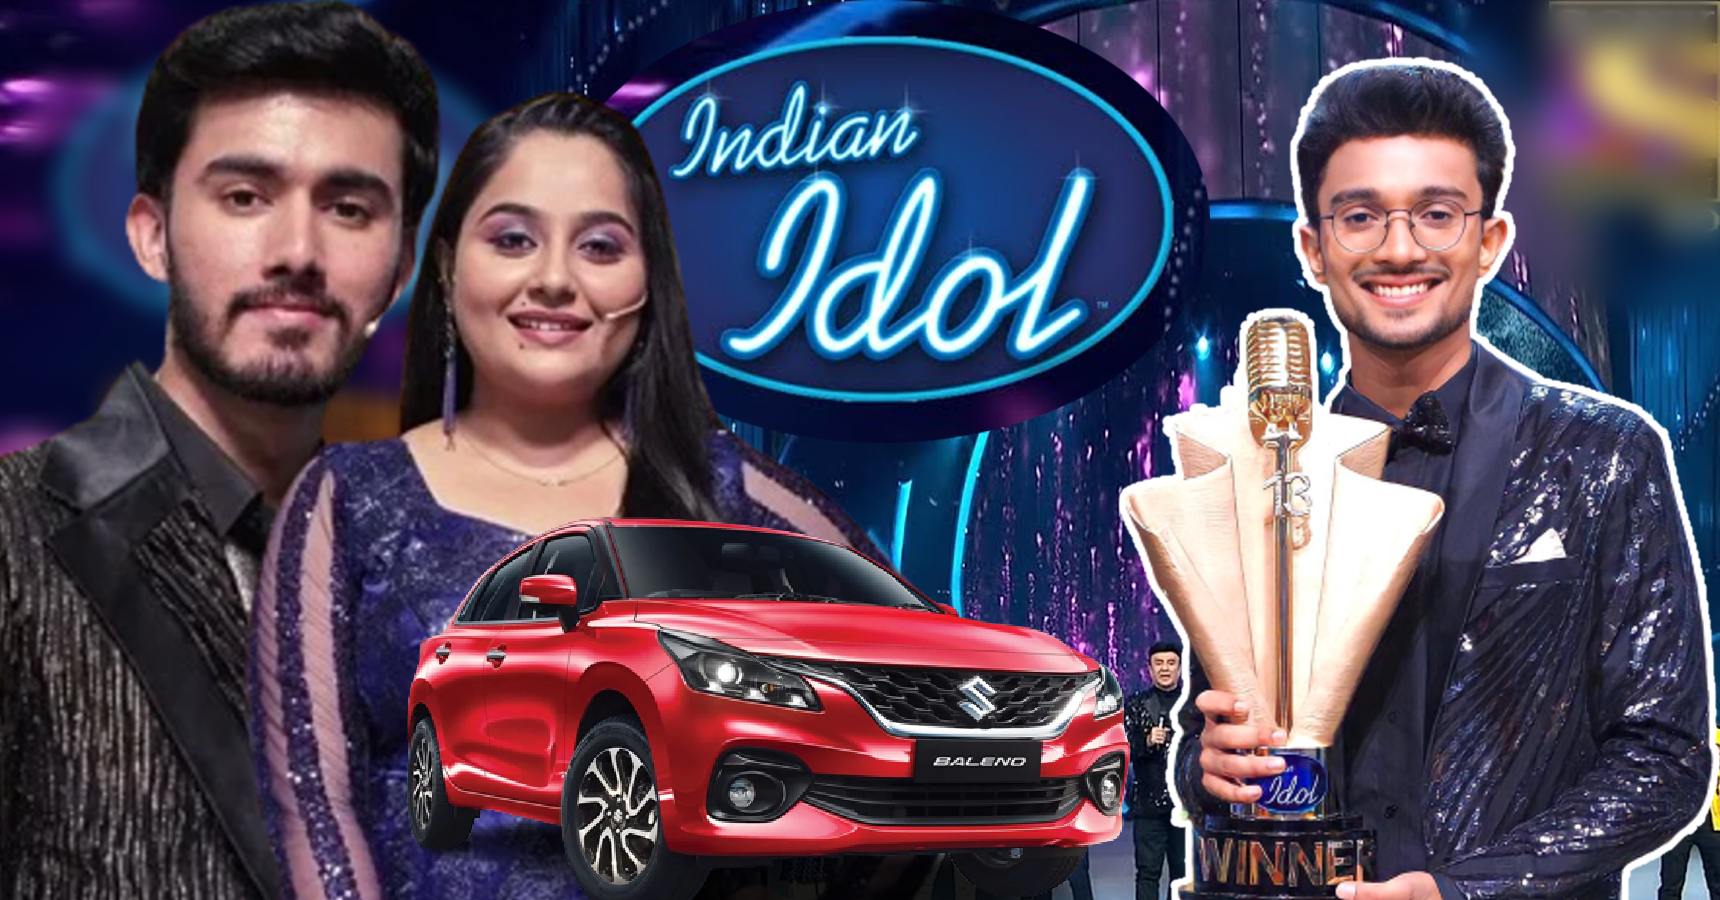 List of What Indian Idol 13 winner Rishi Singh and other win